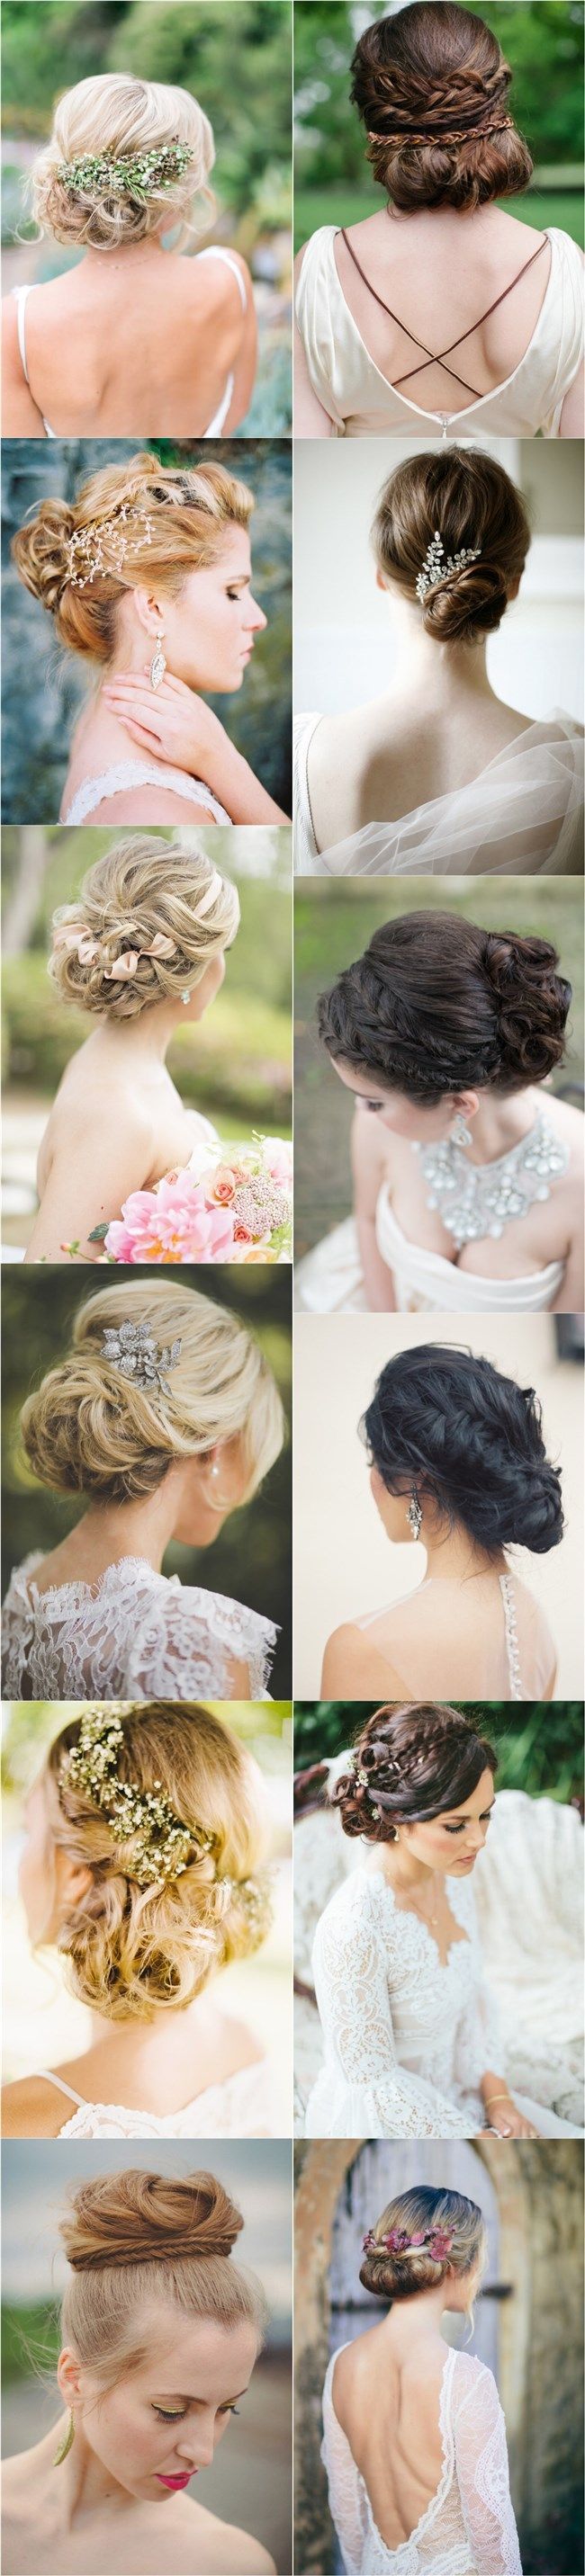 wedding updos hairstyles for long hair